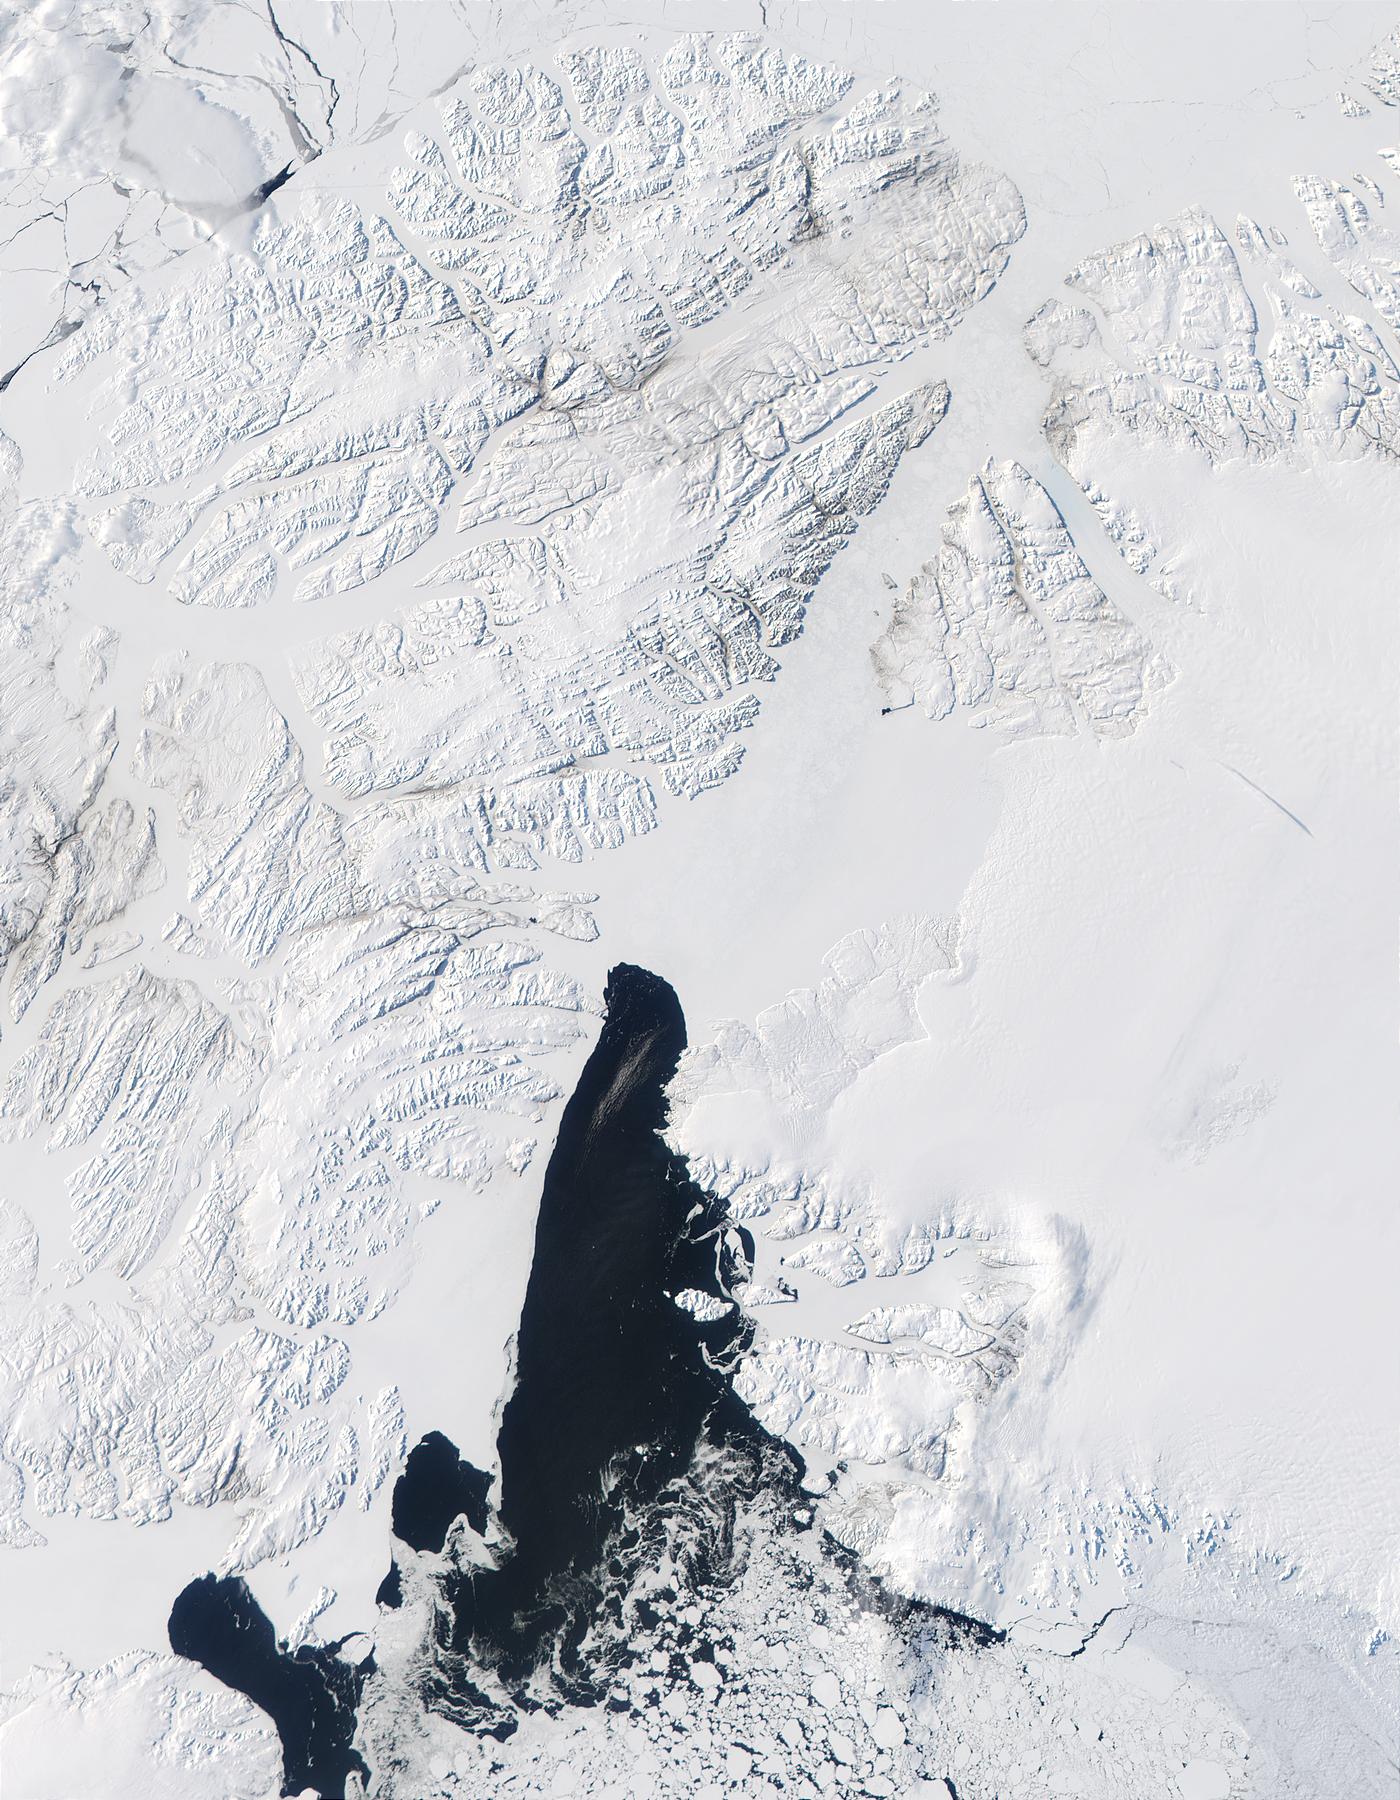 Queen Elizabeth Islands (Northern Canada), Northern coast of Greenland, and Baffin Bay - related image preview